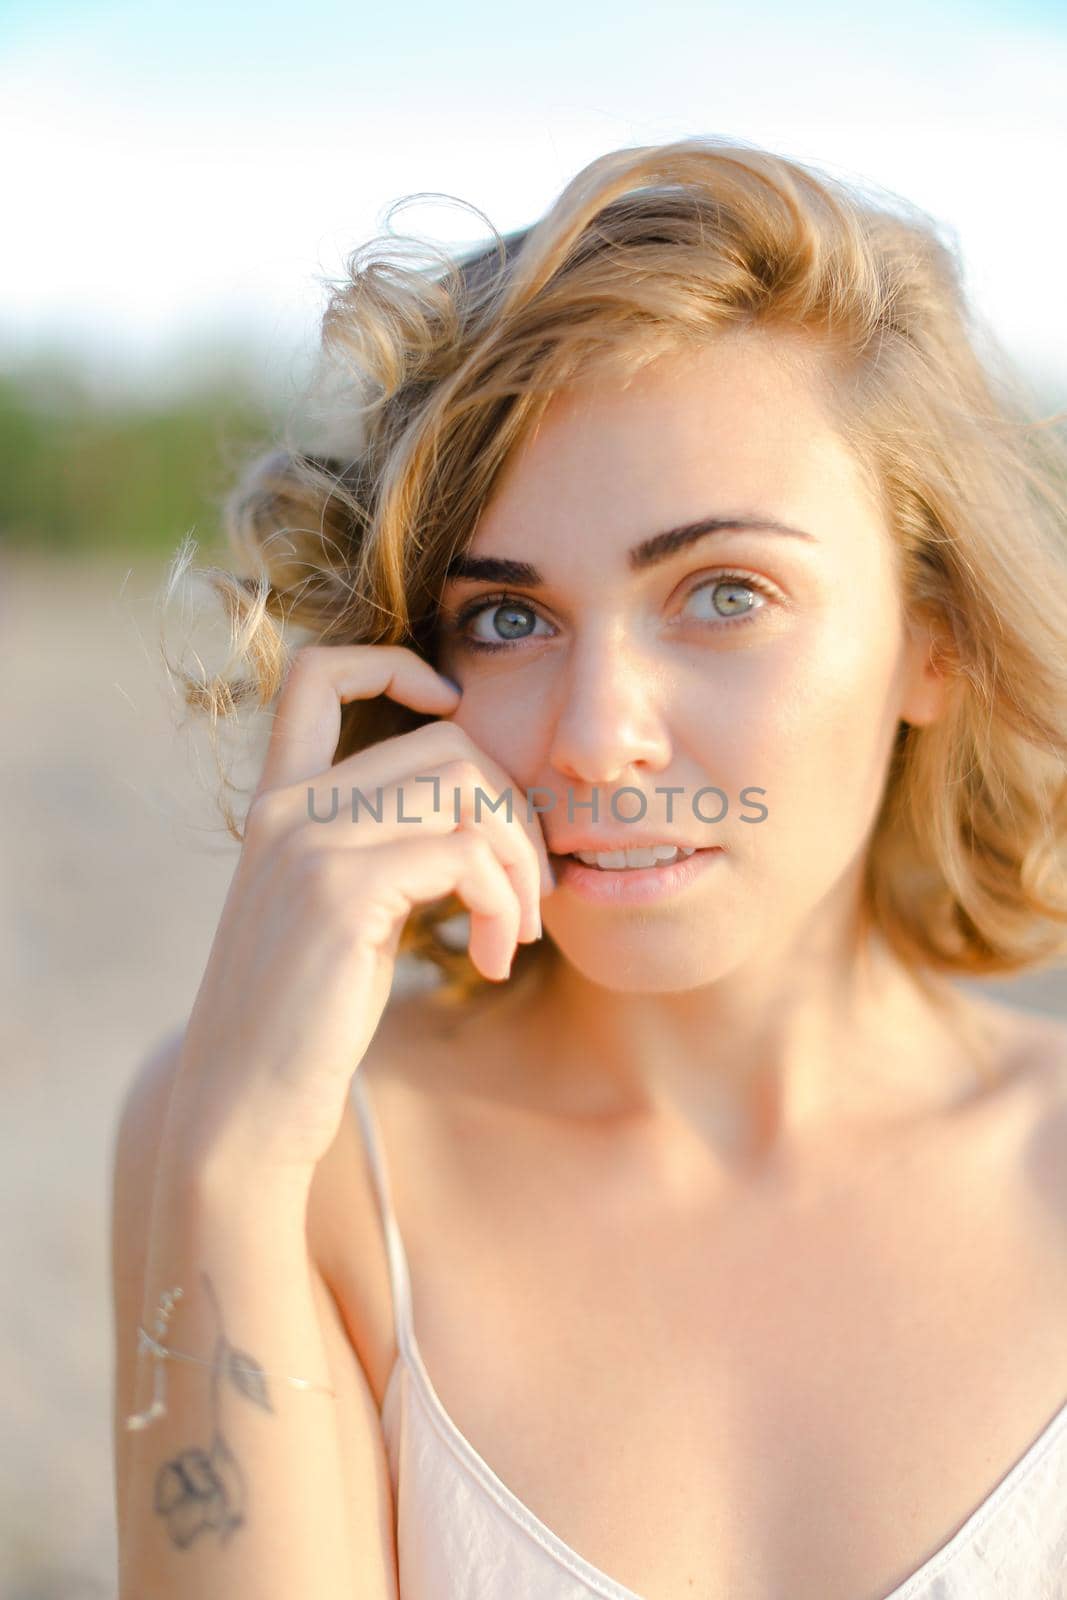 Close up portrait of young blonde woman without makeup. Concept of natural beauty and feamale person.